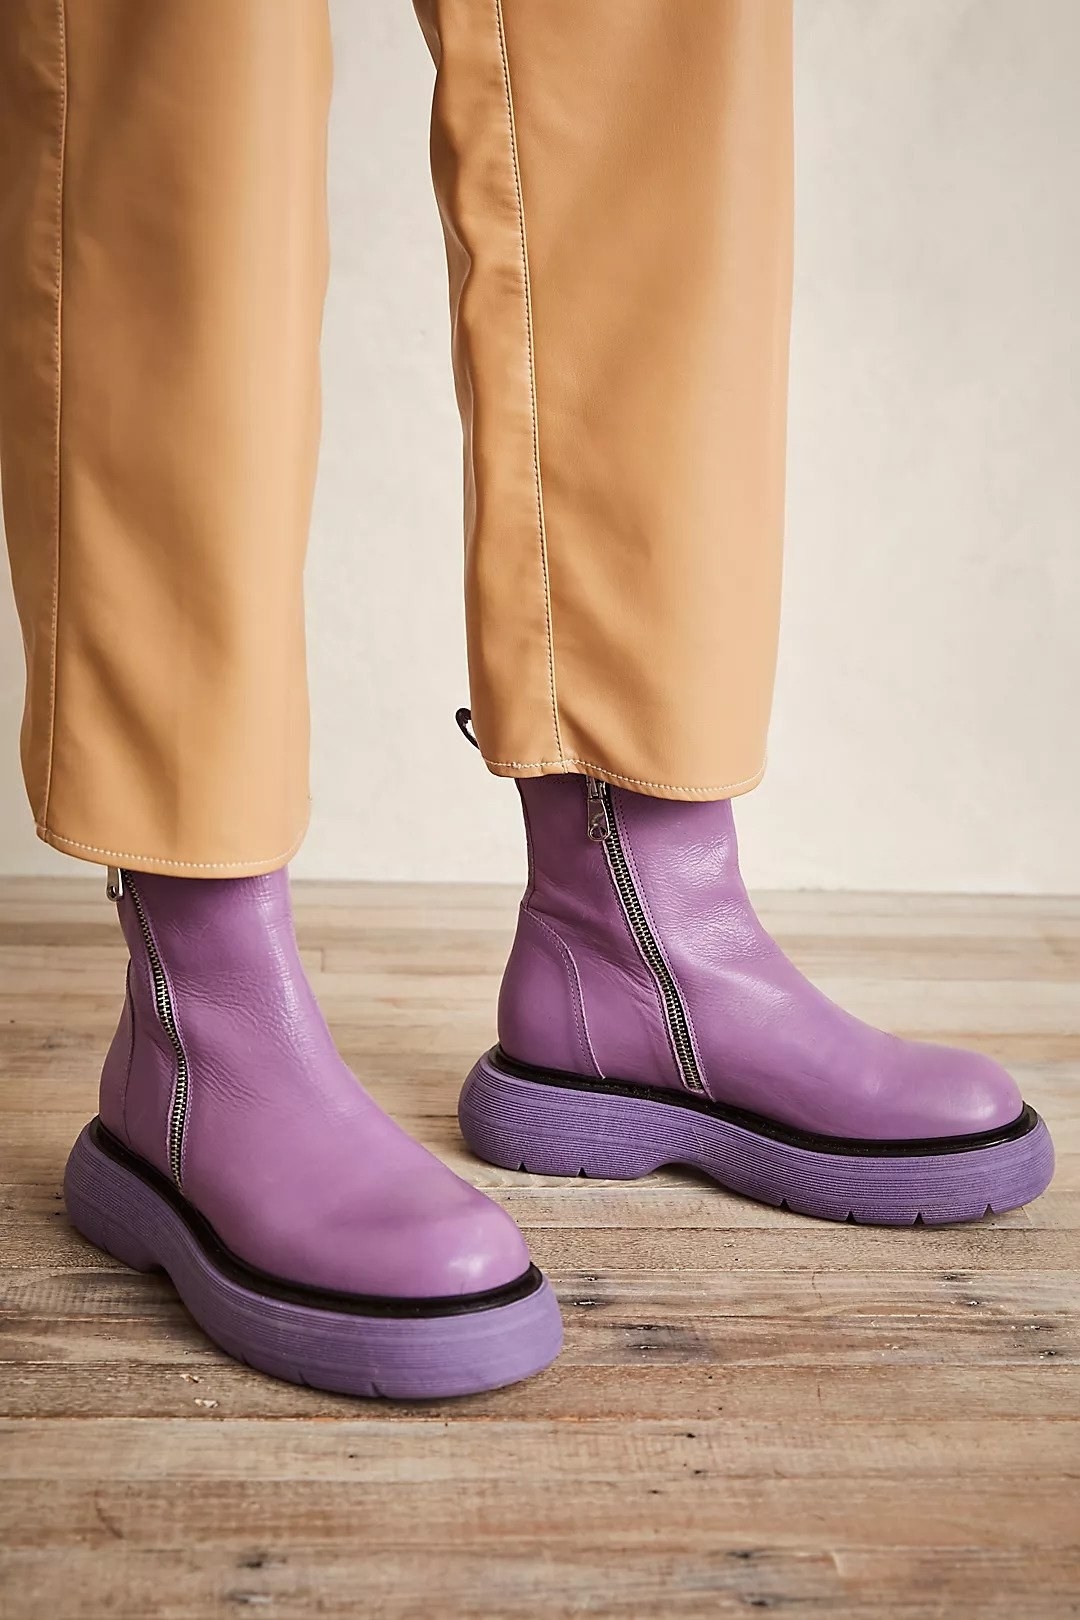 cushy boot with tall, thick soles and over-the-ankle fit in purple color. they zip on.